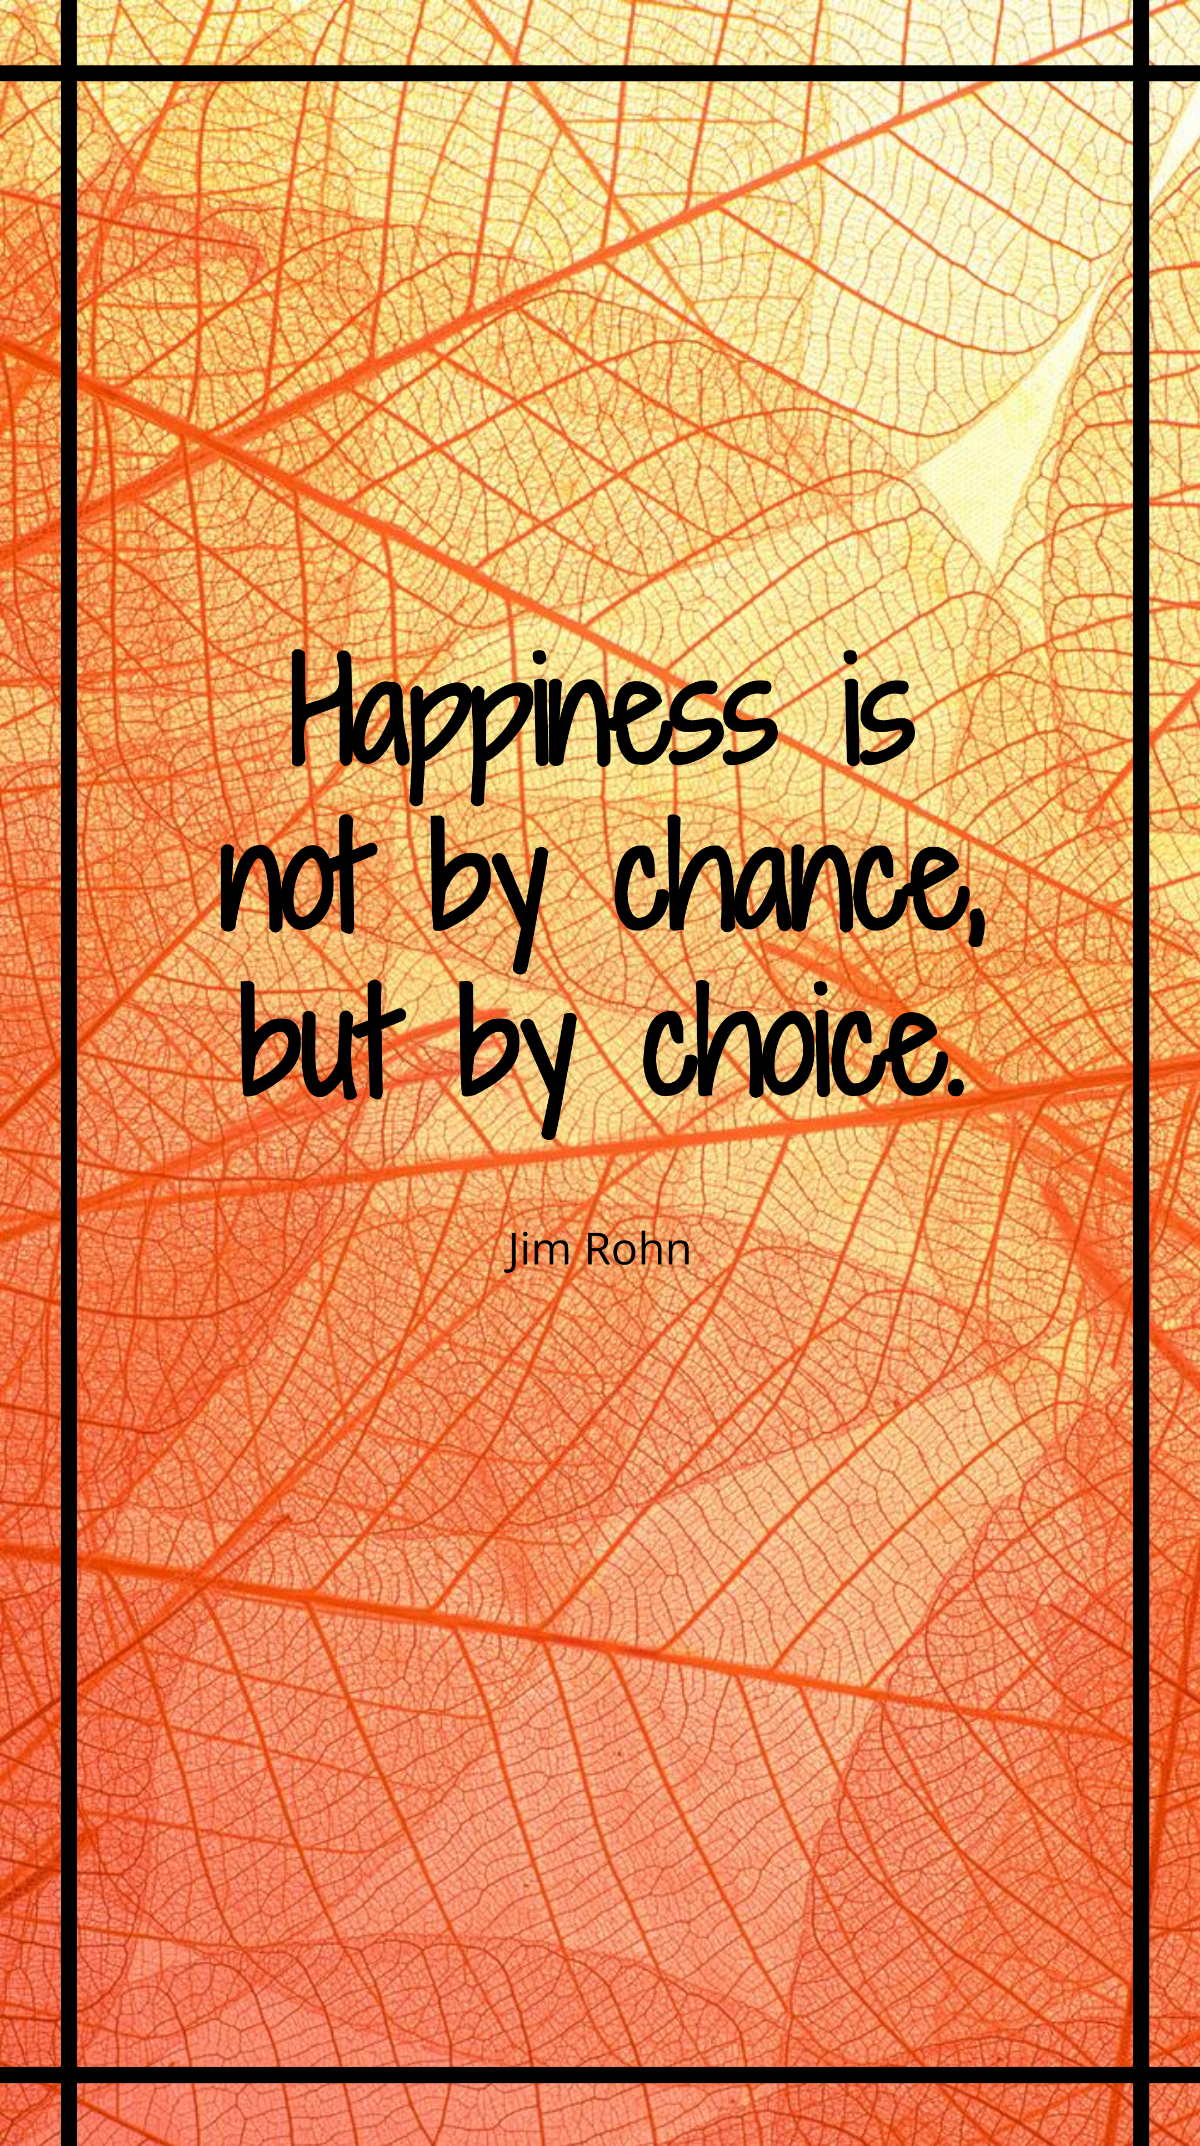 Jim Rohn - Happiness is not by chance, but by choice. Template